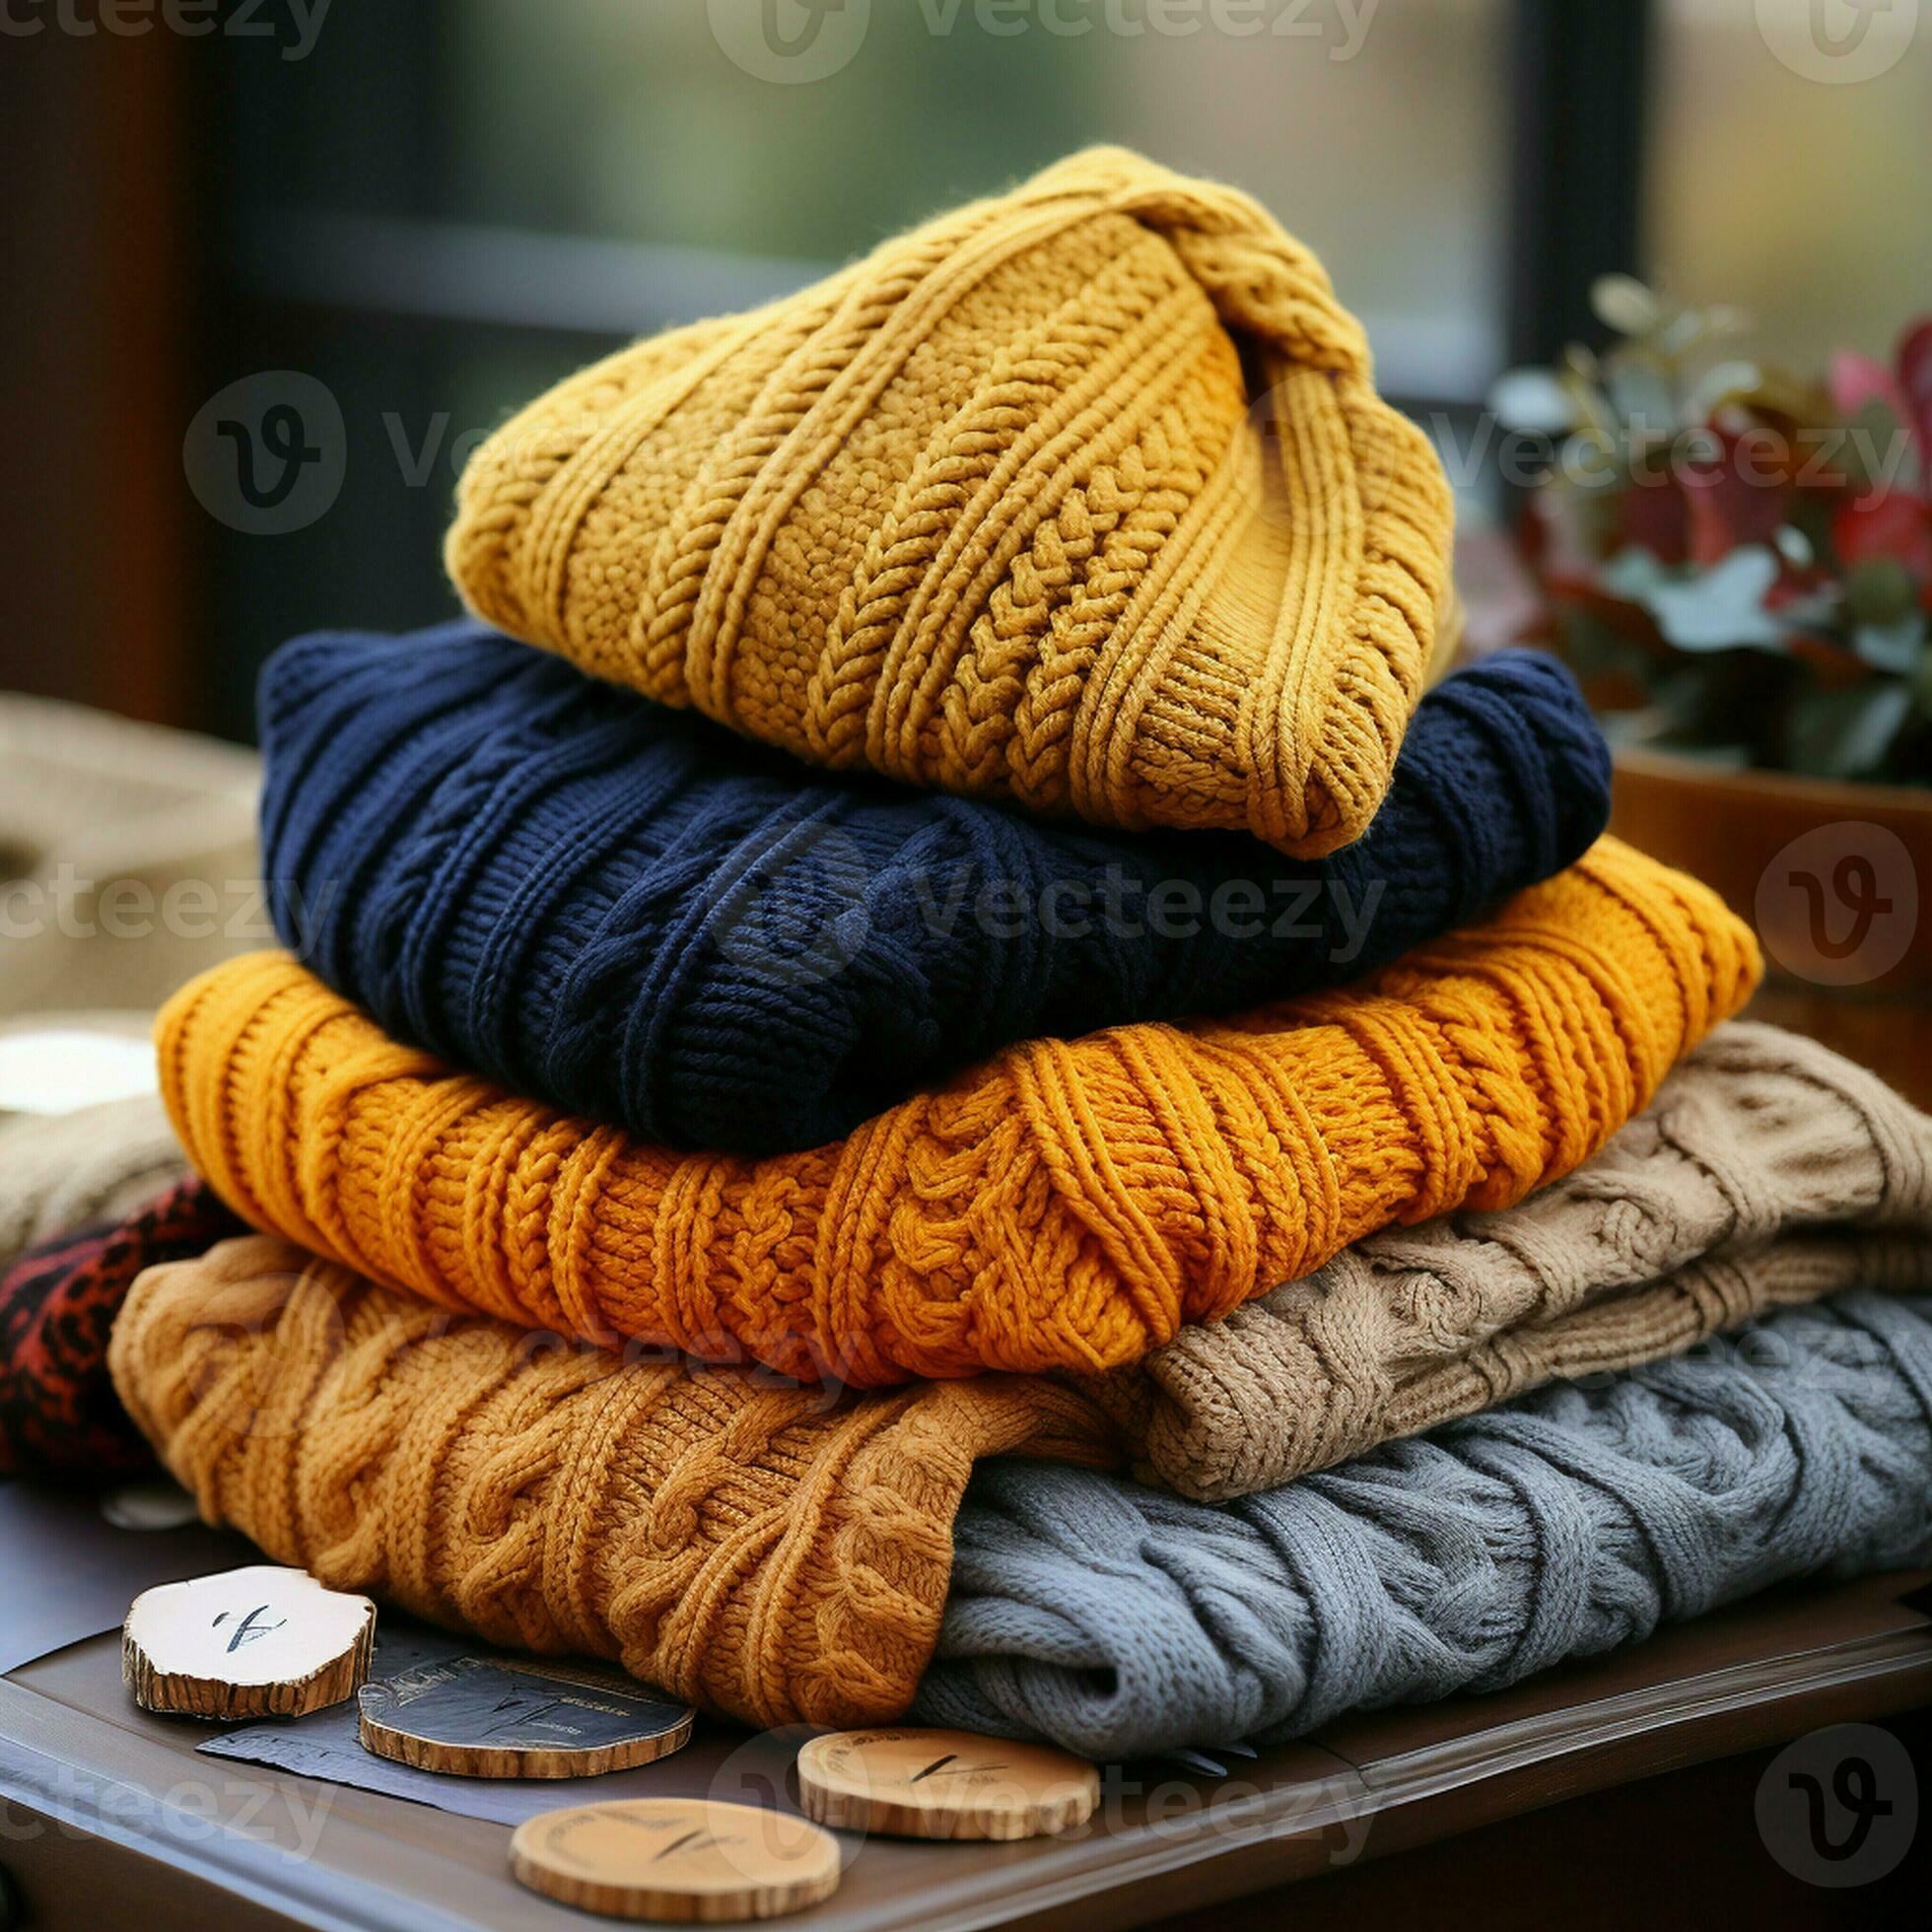 tack of knitted textured clothing on table.Colorful winter clothes